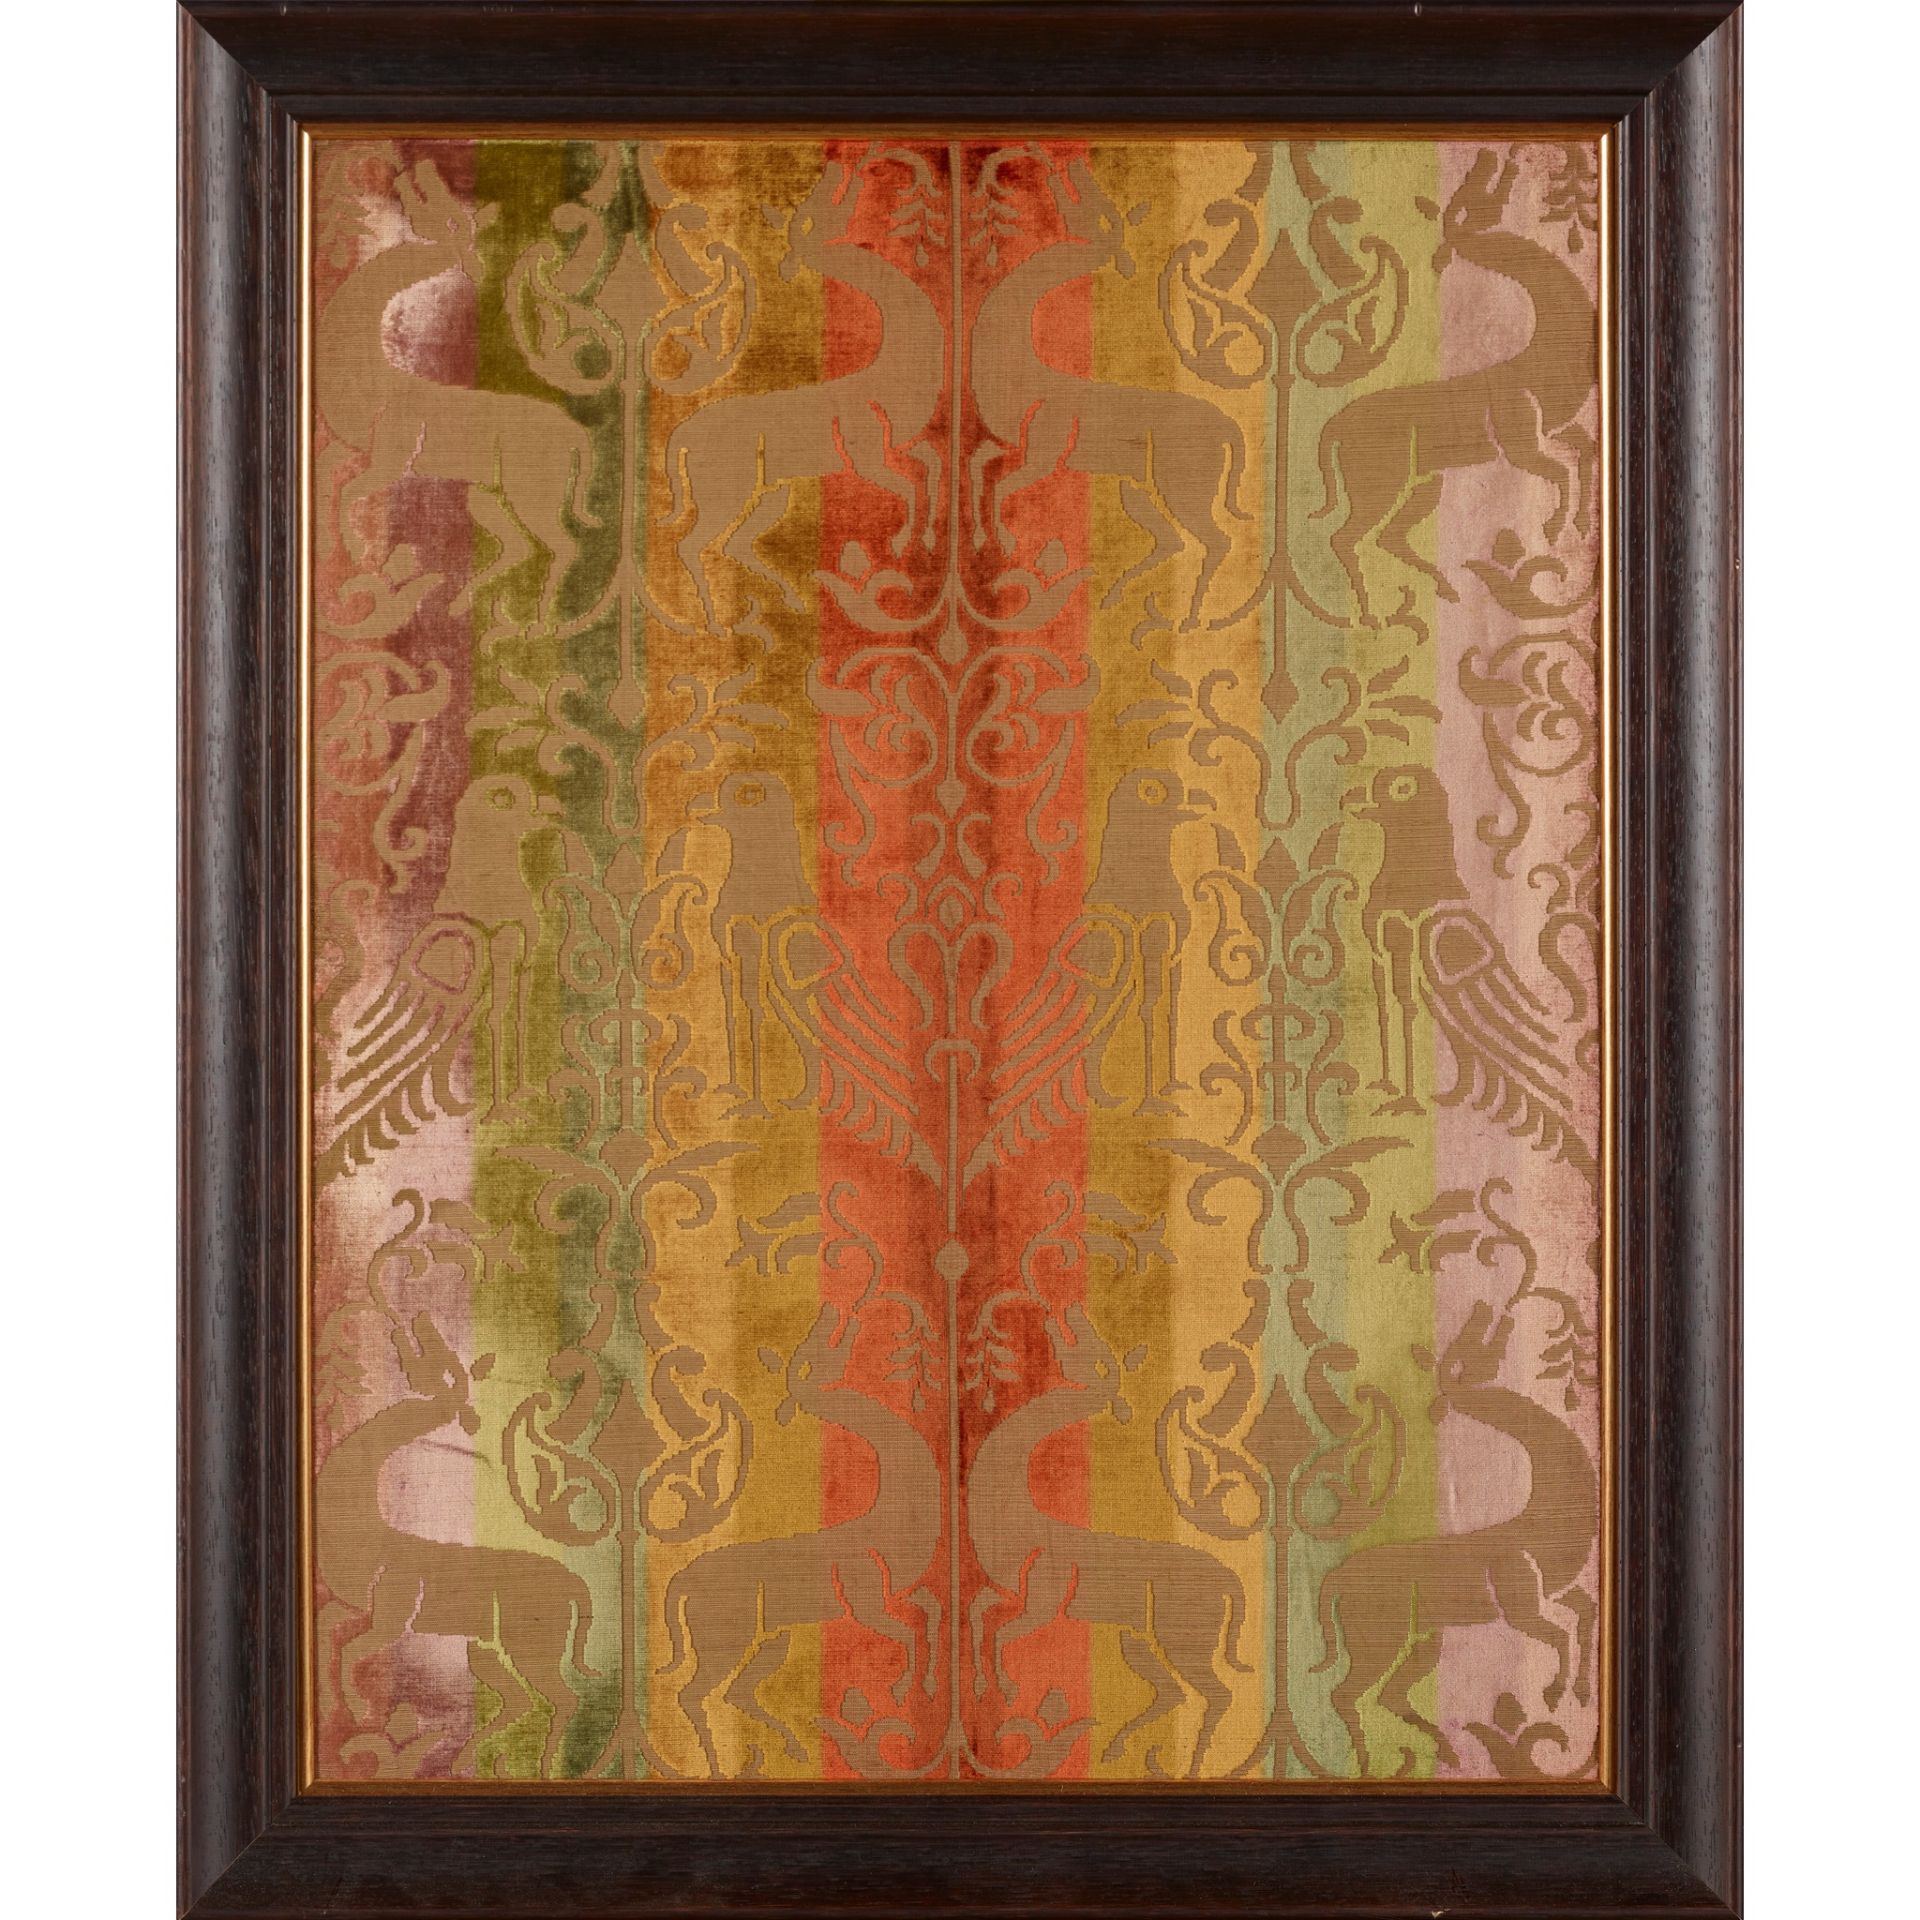 ENGLISH MEDIEVAL REVIVAL FRAMED FABRIC PANEL, CIRCA 1880 - Image 2 of 3